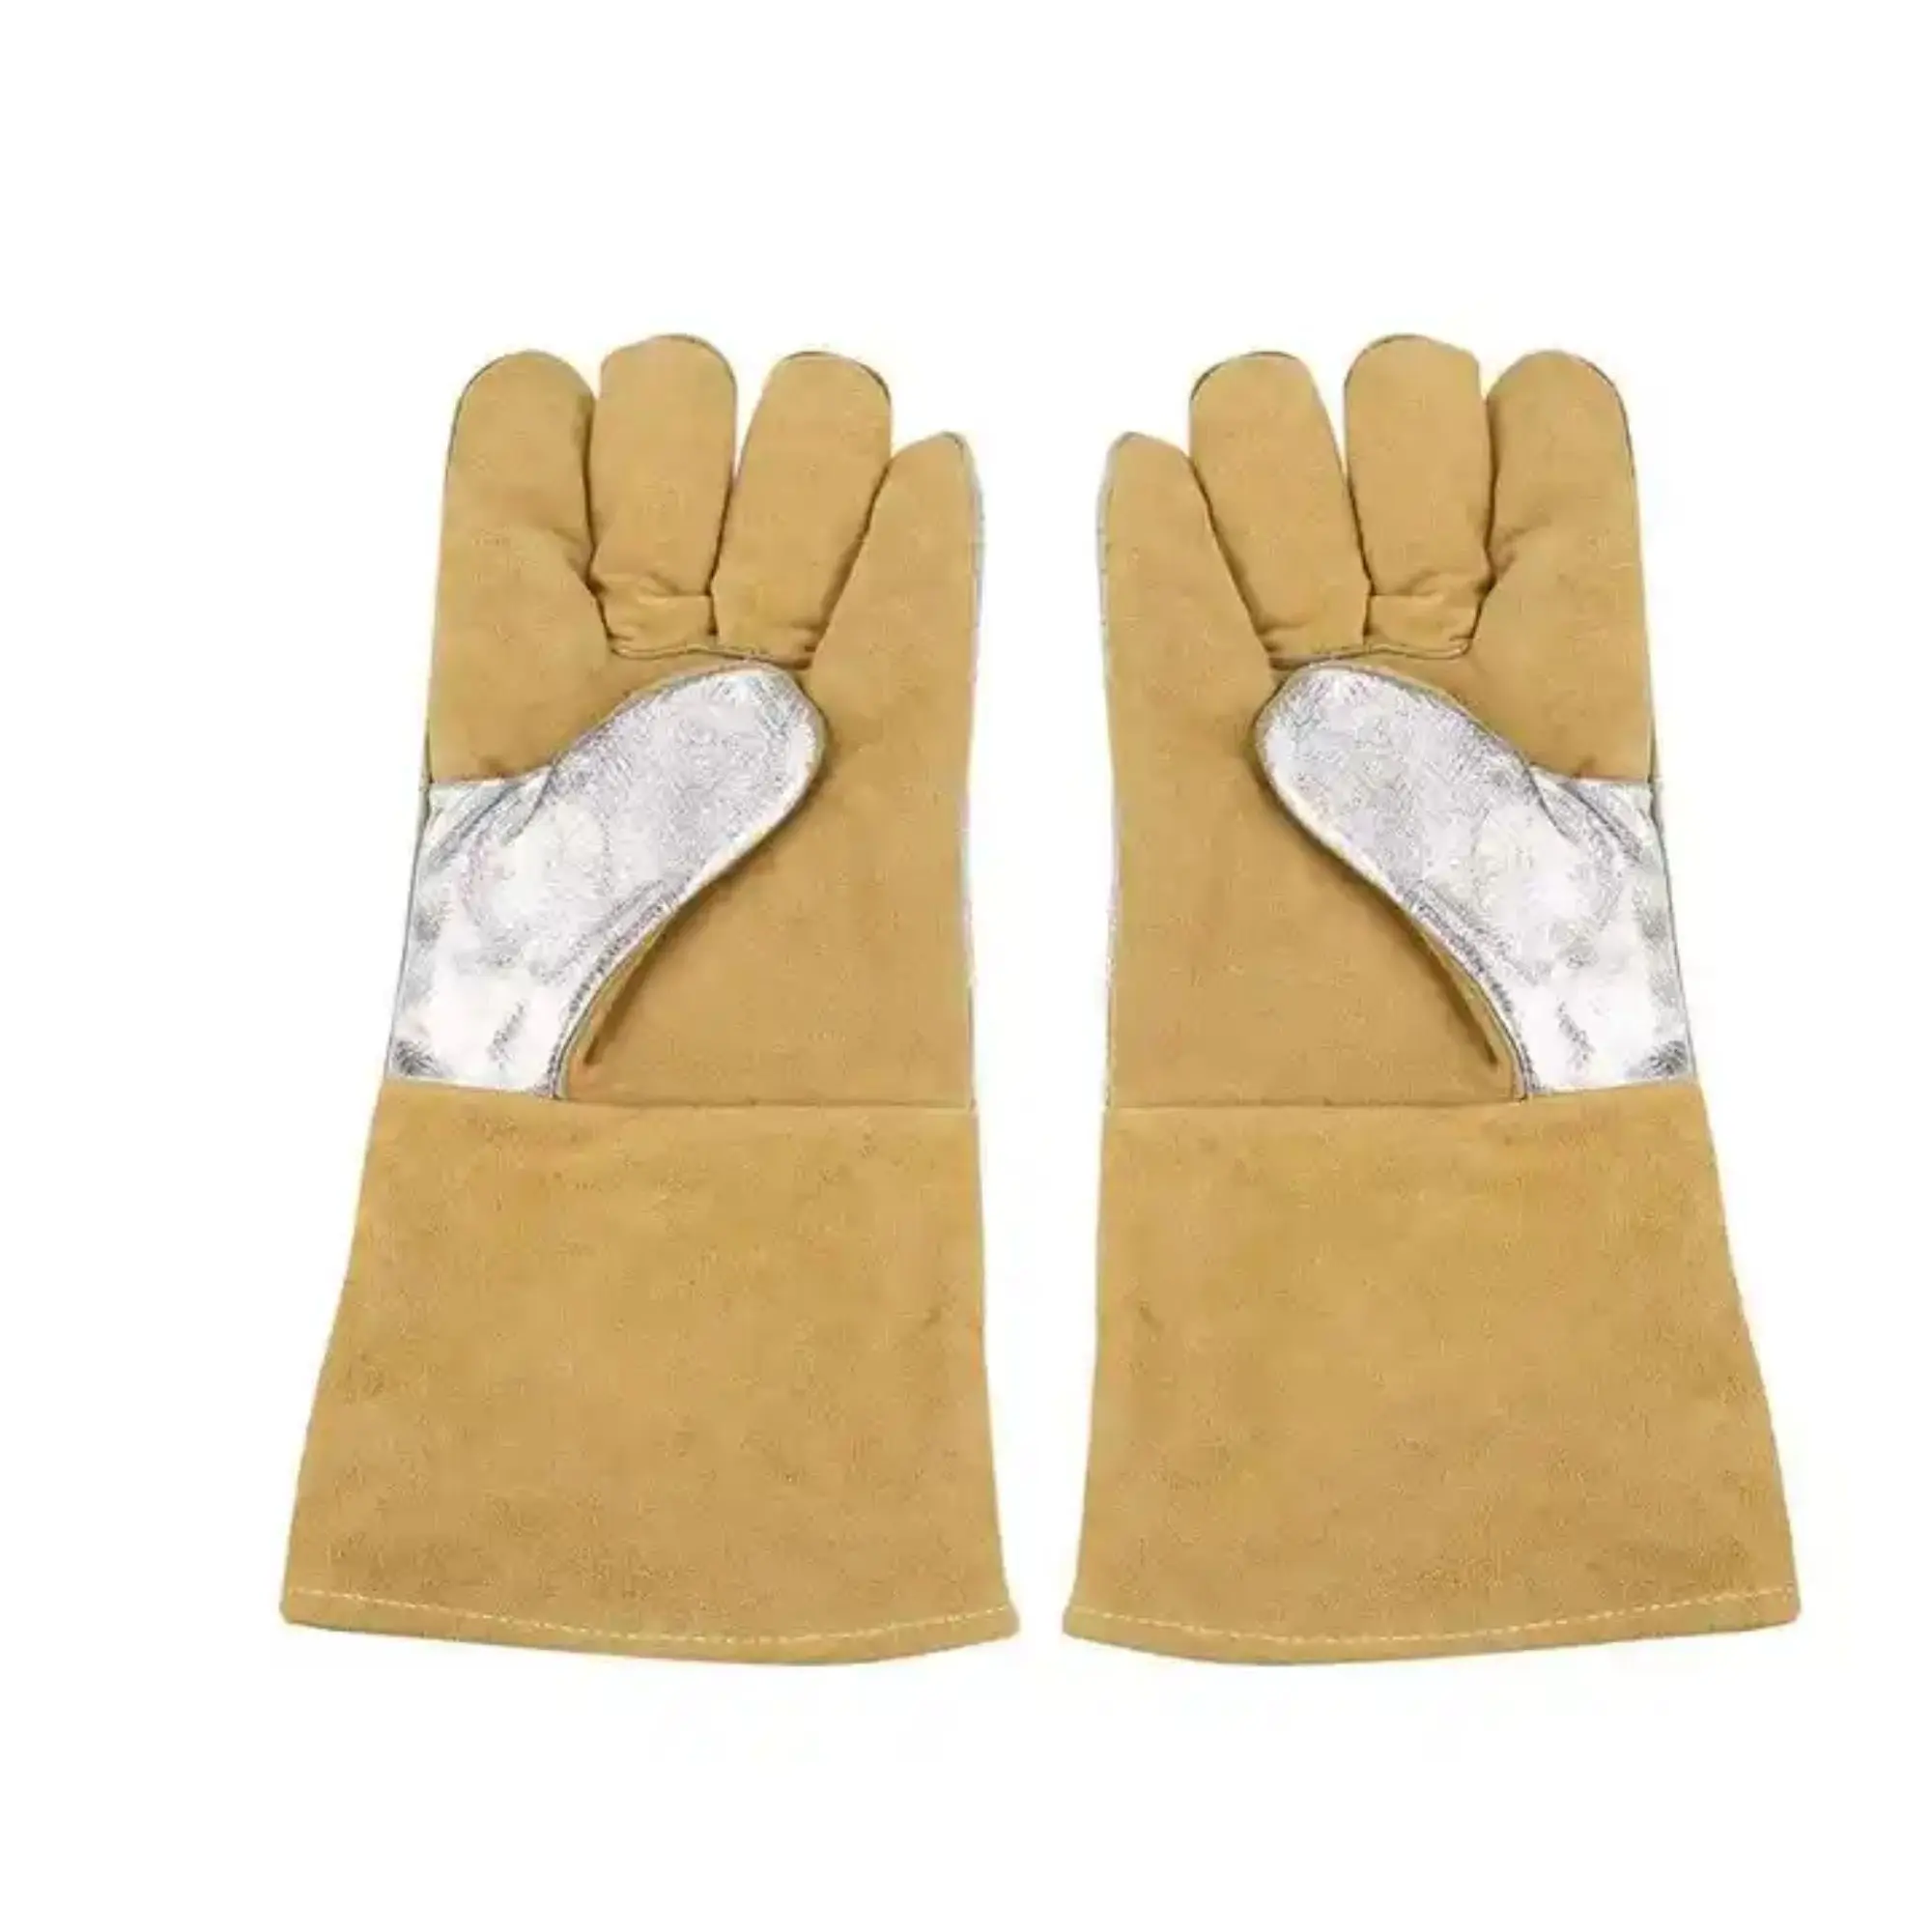 Premium Cowhide Split Leather Industrial Safety Protection Aluminized Back Heat Fire Spark Resistant Welding Gloves for Hand